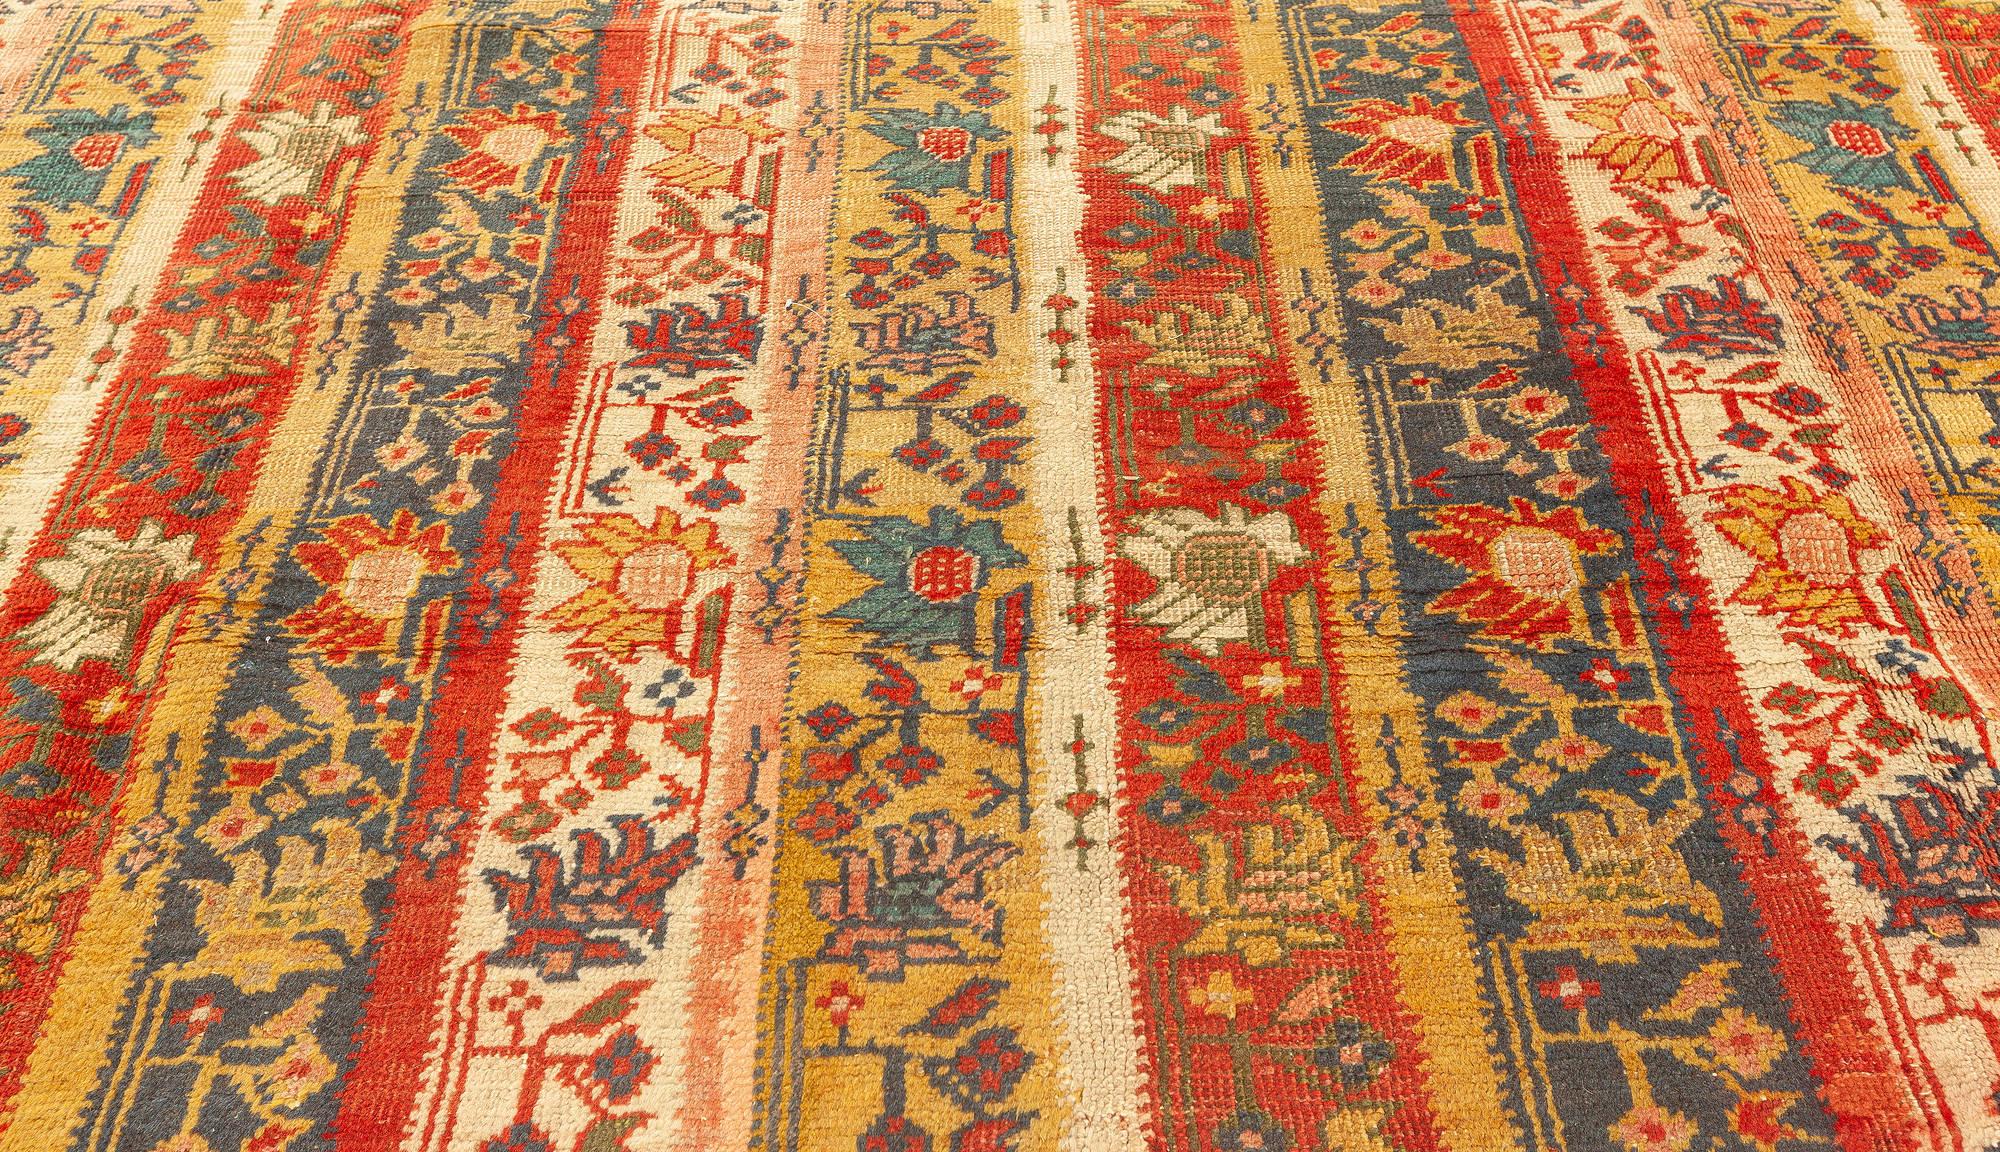 19th Century Turkish Oushak Botanic Handwoven Rug In Good Condition For Sale In New York, NY